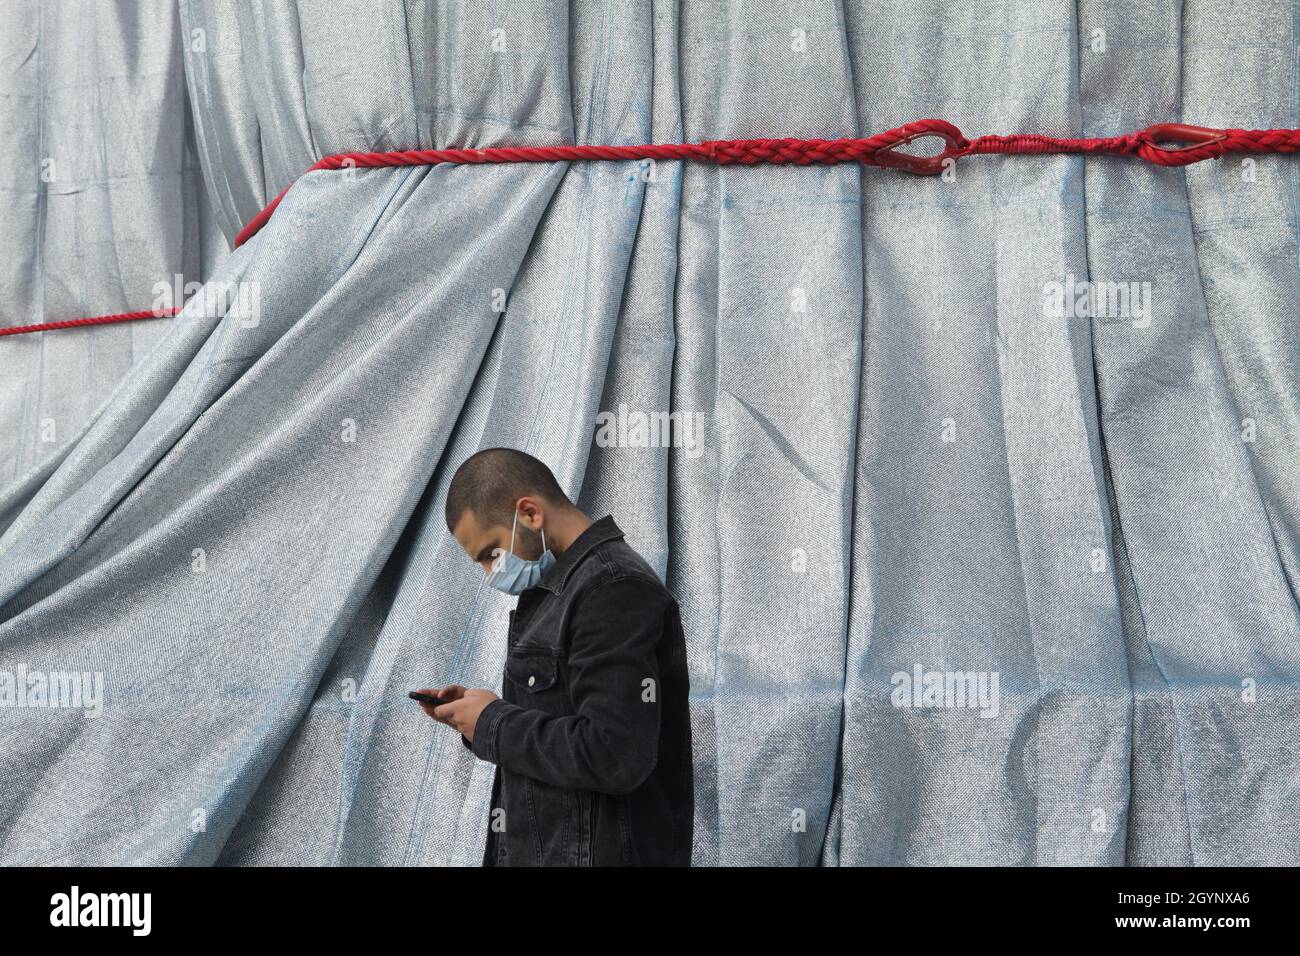 Young man wearing a face mask uses a smartphone in front of the Arc de Triomphe wrapped in silver-blue fabric fastened with red ropes in the Place Charles de Gaulle in Paris, France. The Arc de Triomphe was wrapped for two weeks being converted to an artwork as it was designed by Christo and Jeanne-Claude in September 2021. Stock Photo